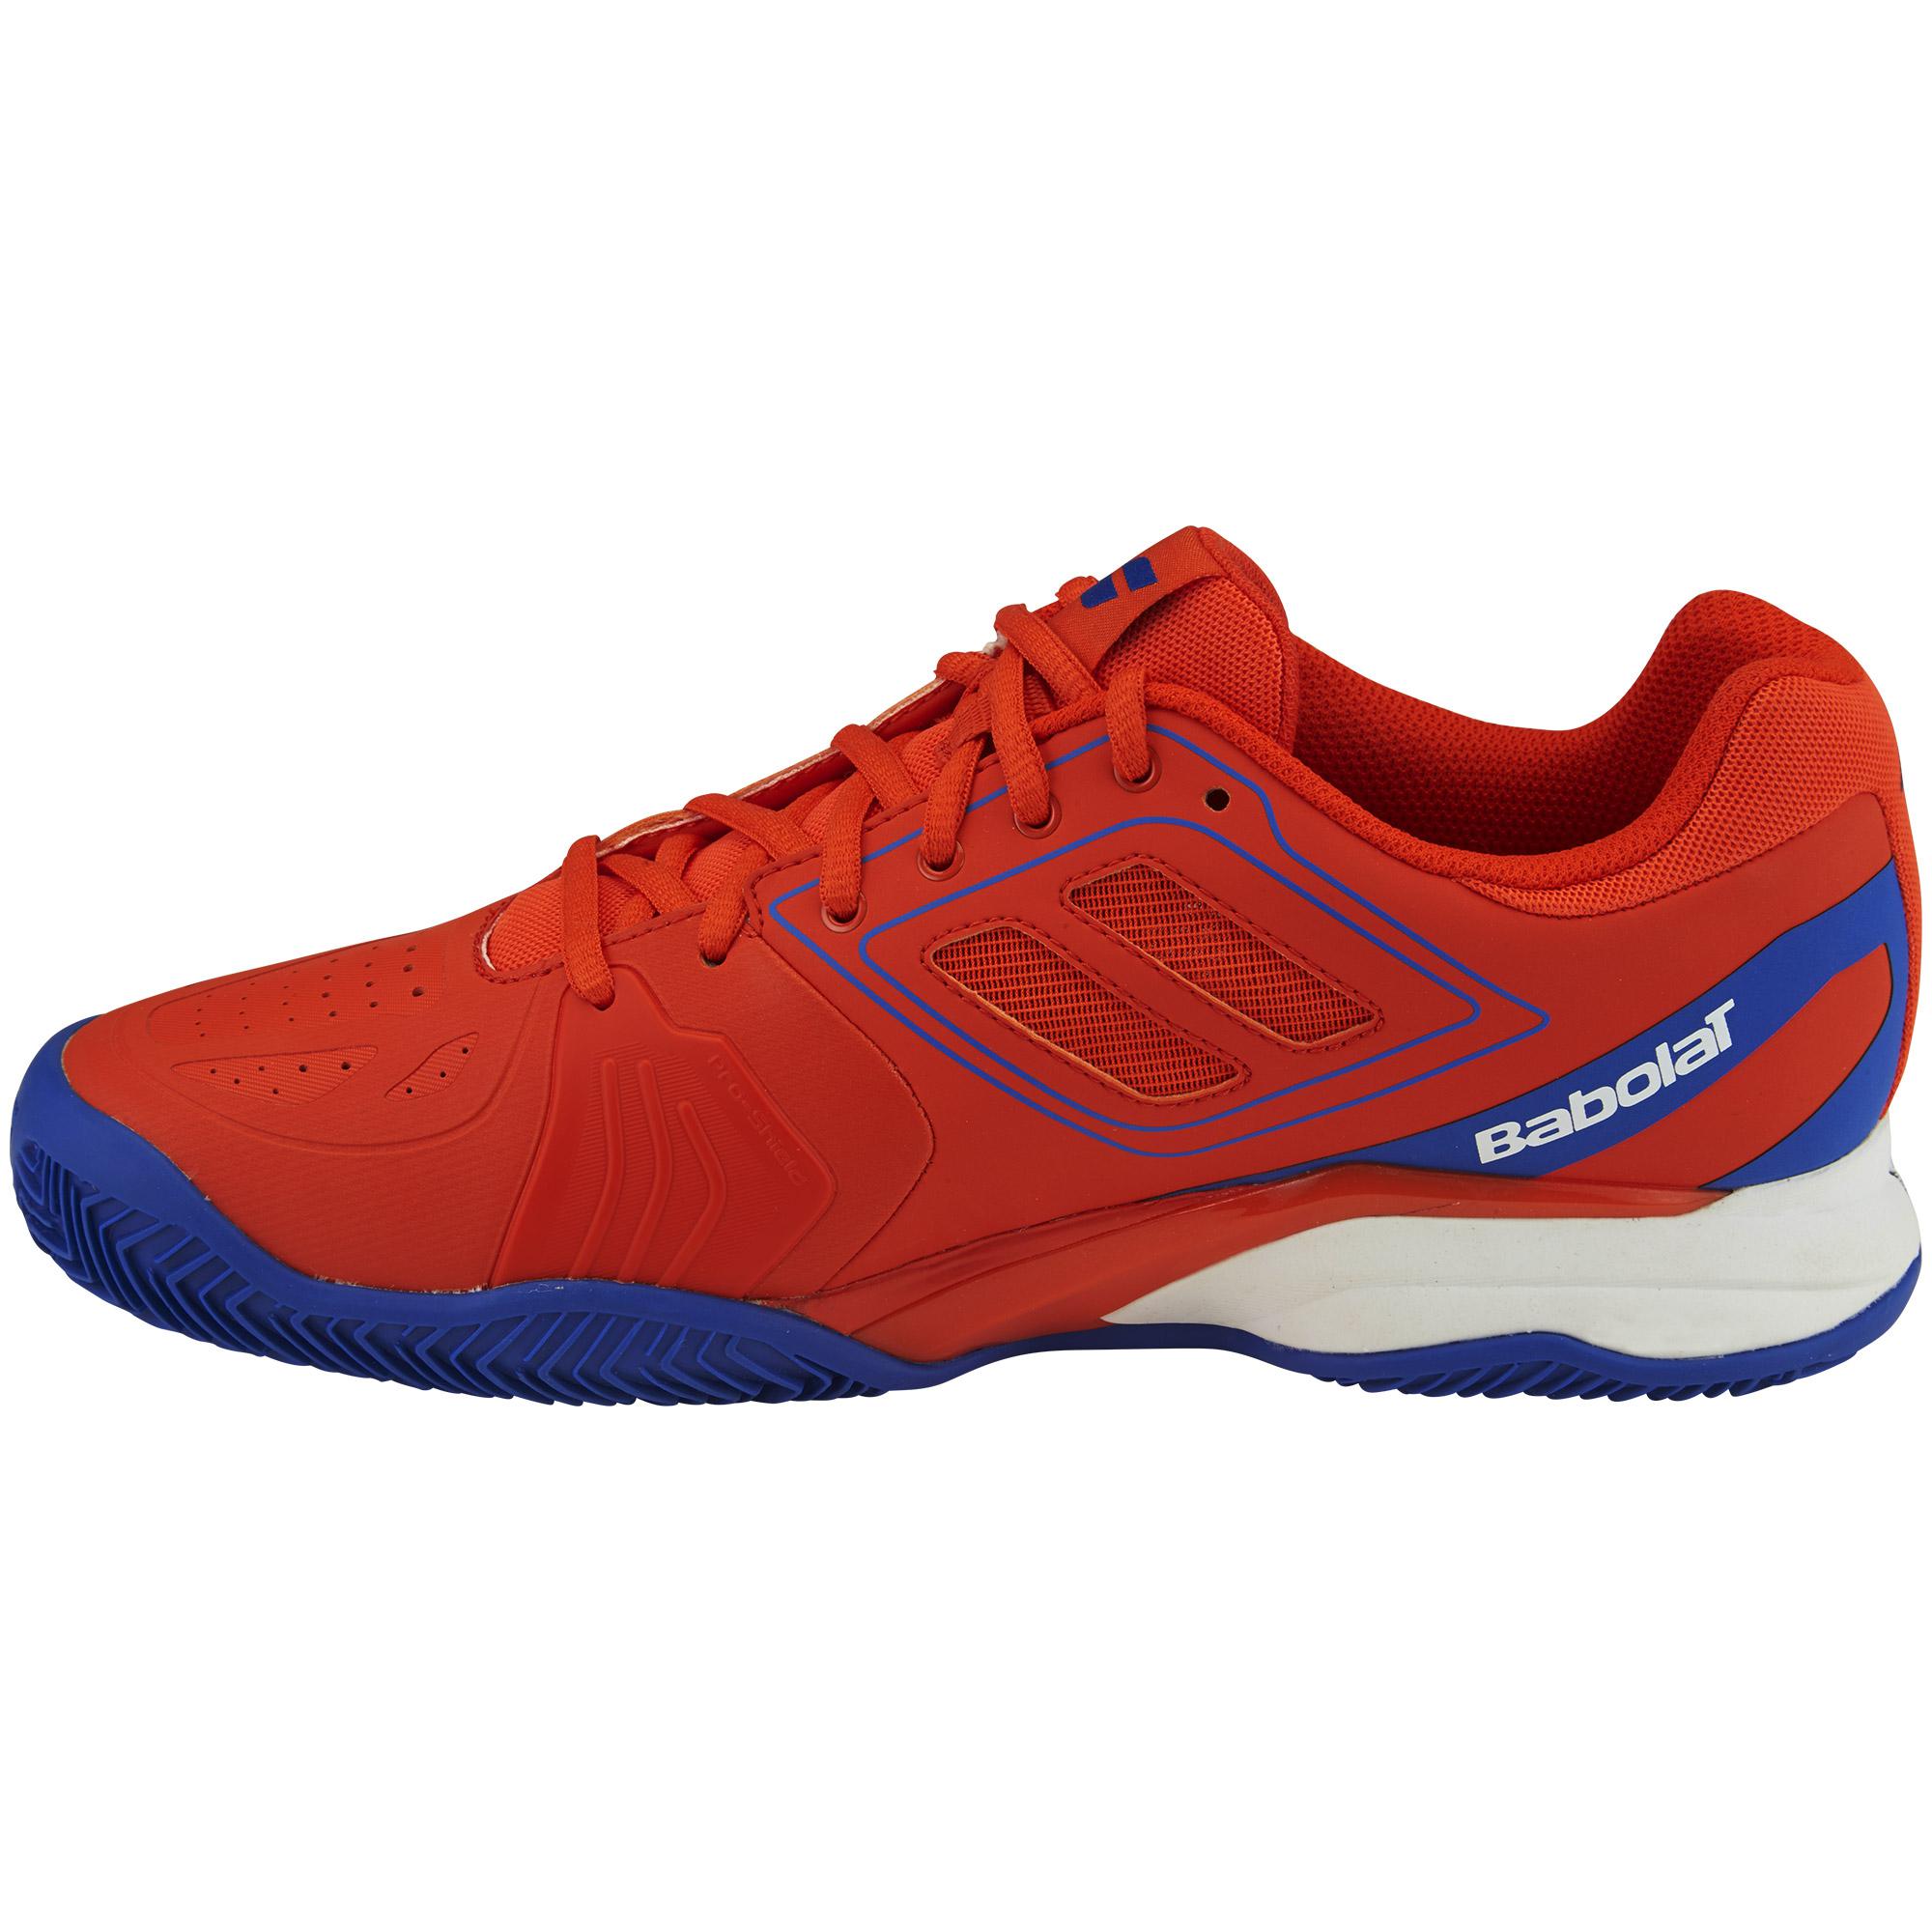 Babolat Clay Court Tennis Shoes